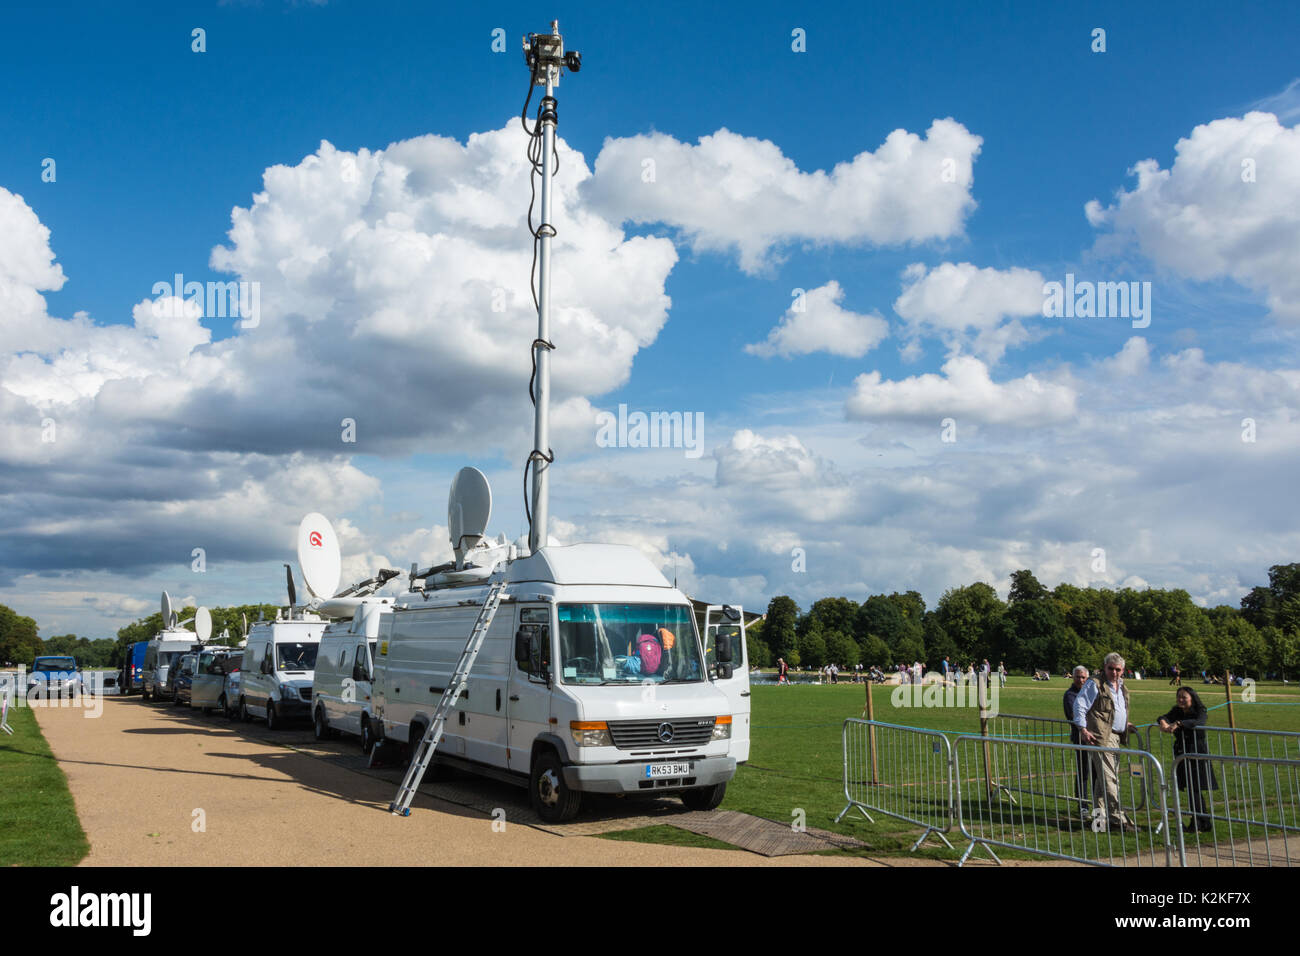 London, UK. 31st Aug, 2017. Well wishers, photographers and news crews jostle outside the gates of Kensington Palace to commemmorate and pay tribute to Princess Diana, twenty years after her death. Credit: Benjamin John/Alamy Live News Stock Photo